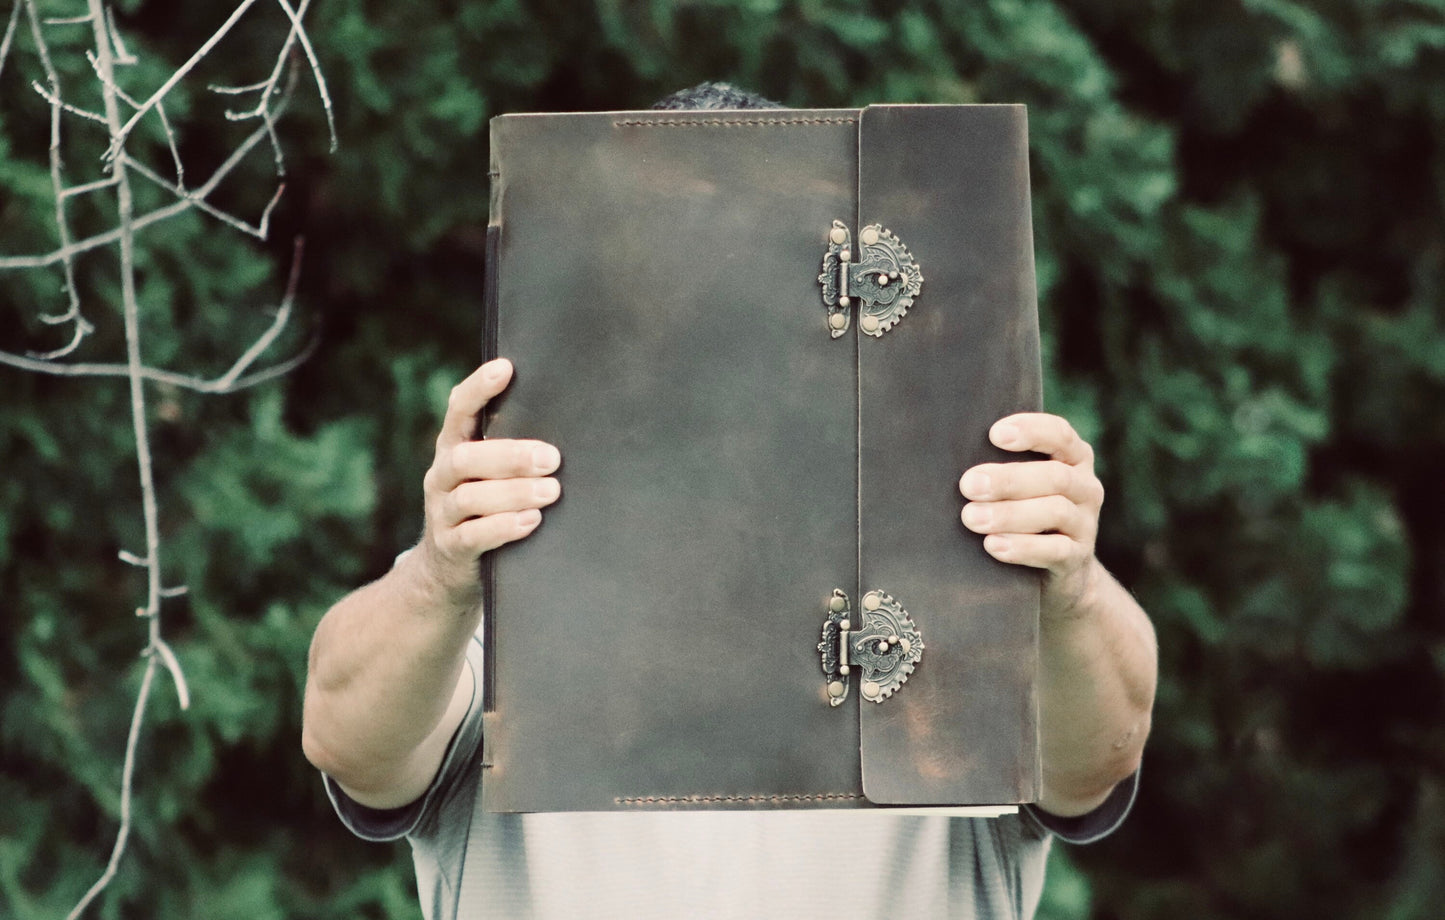 THE MEGA - Giant Leather Family Mega Tome, Huge Rustic Antique Heirloom Keepsake Book, Large Personalized Grimoire, Big Book of Shadows